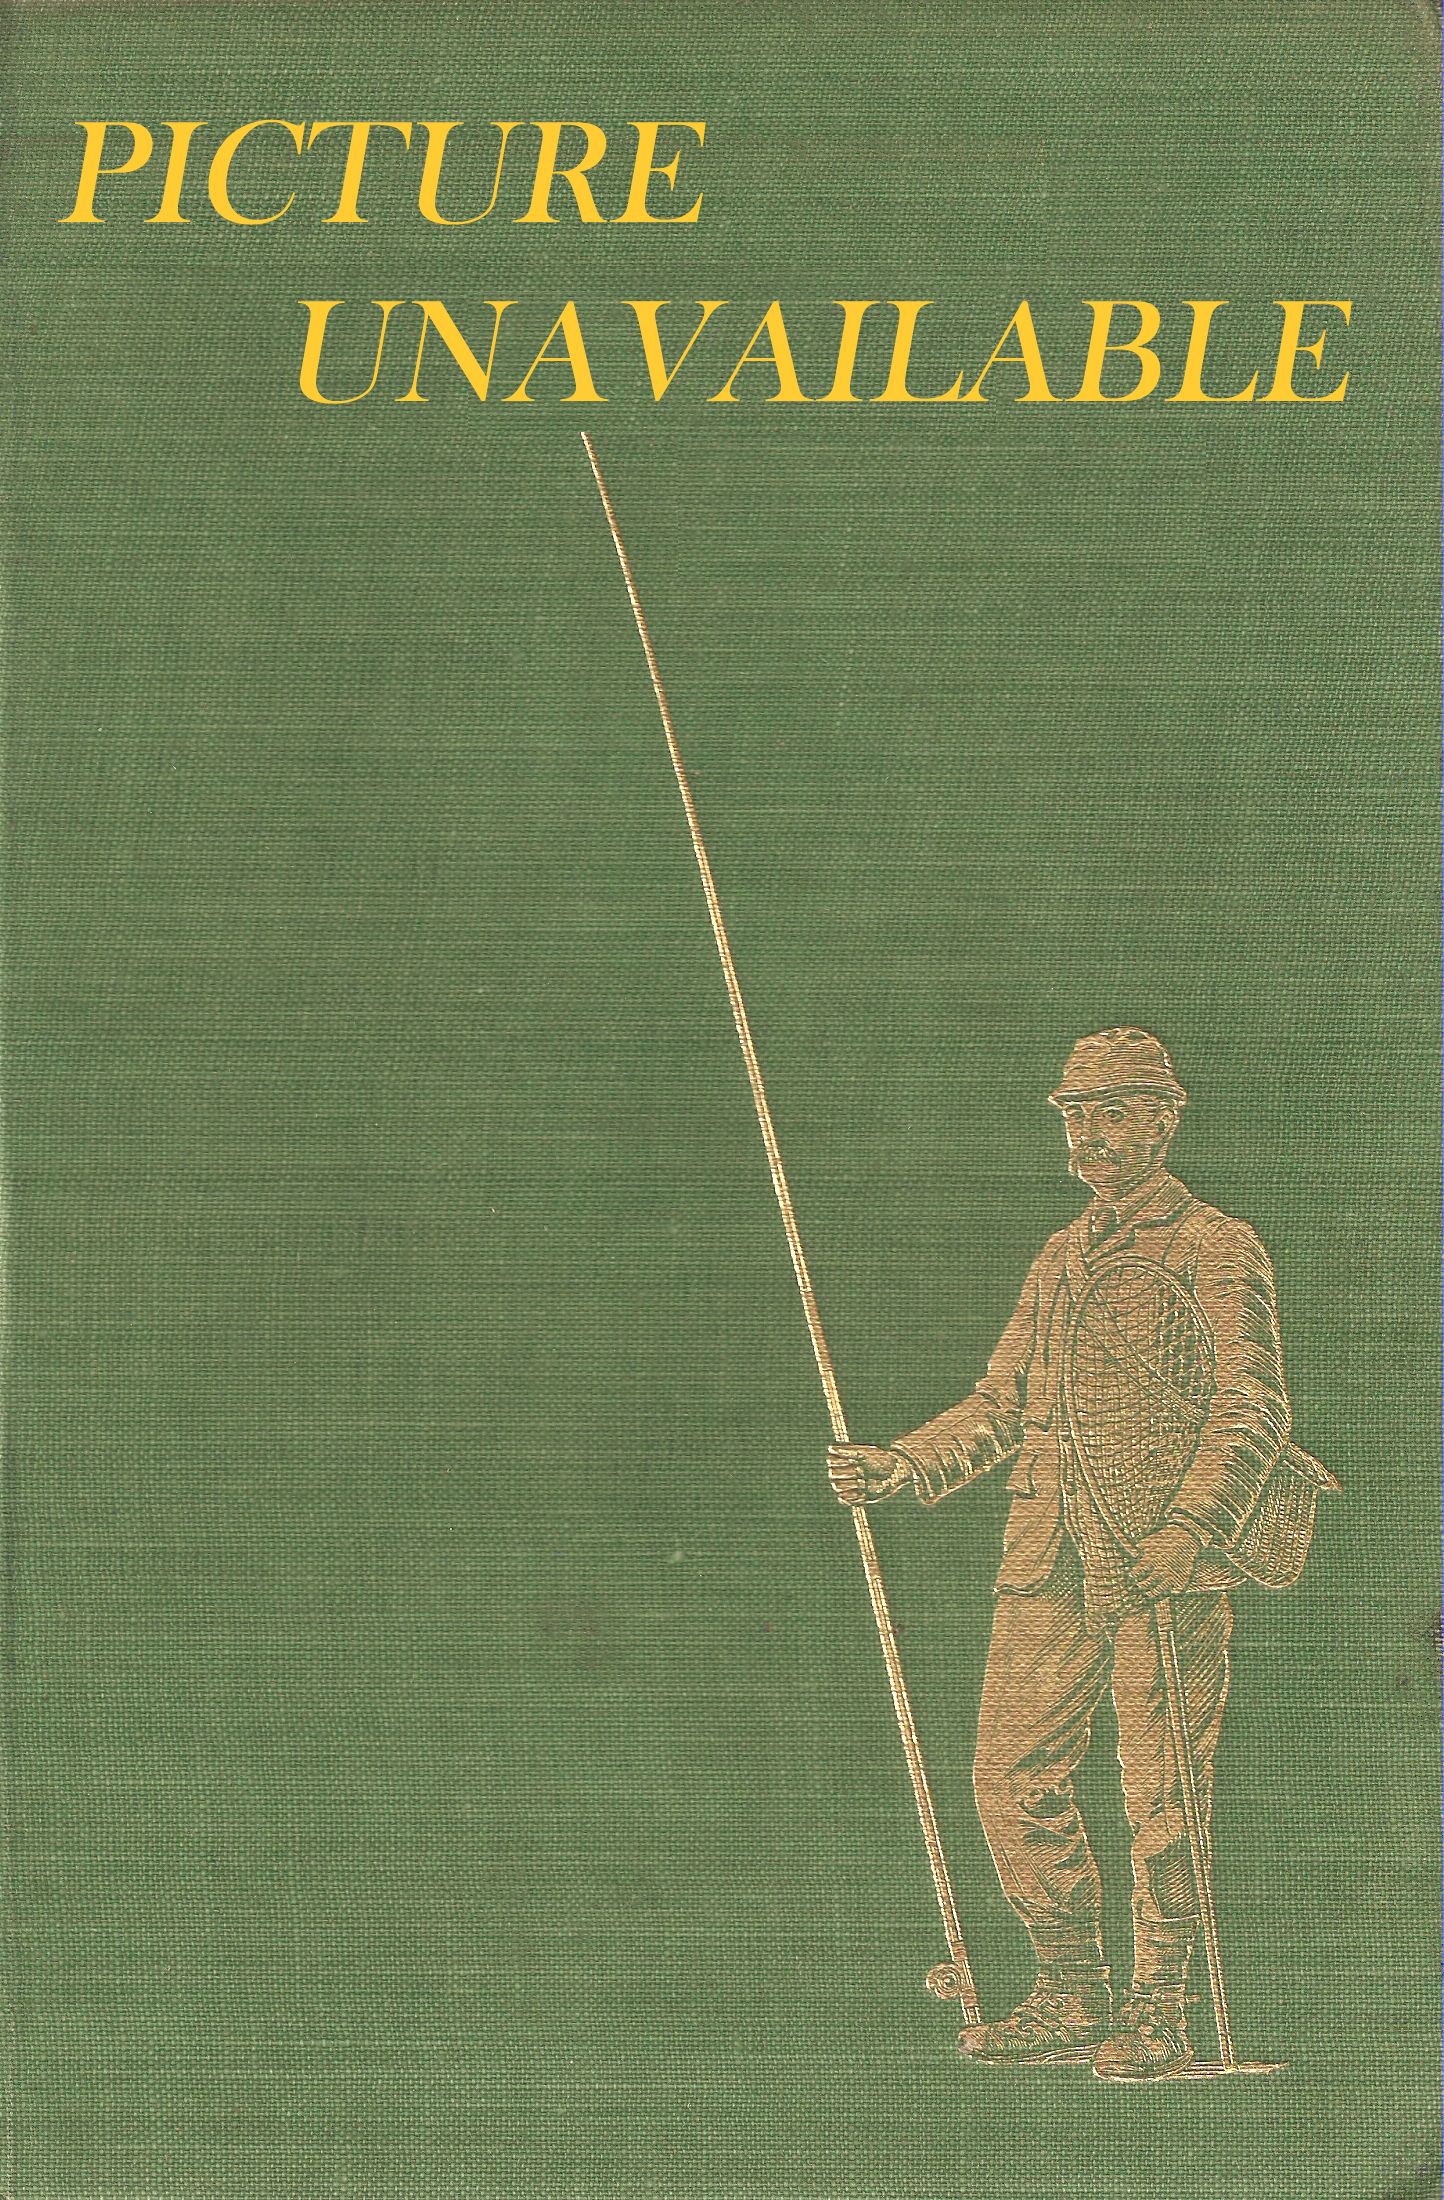 THE COMPLETE BOOK OF GAME CONSERVATION. Edited by Charles Coles.